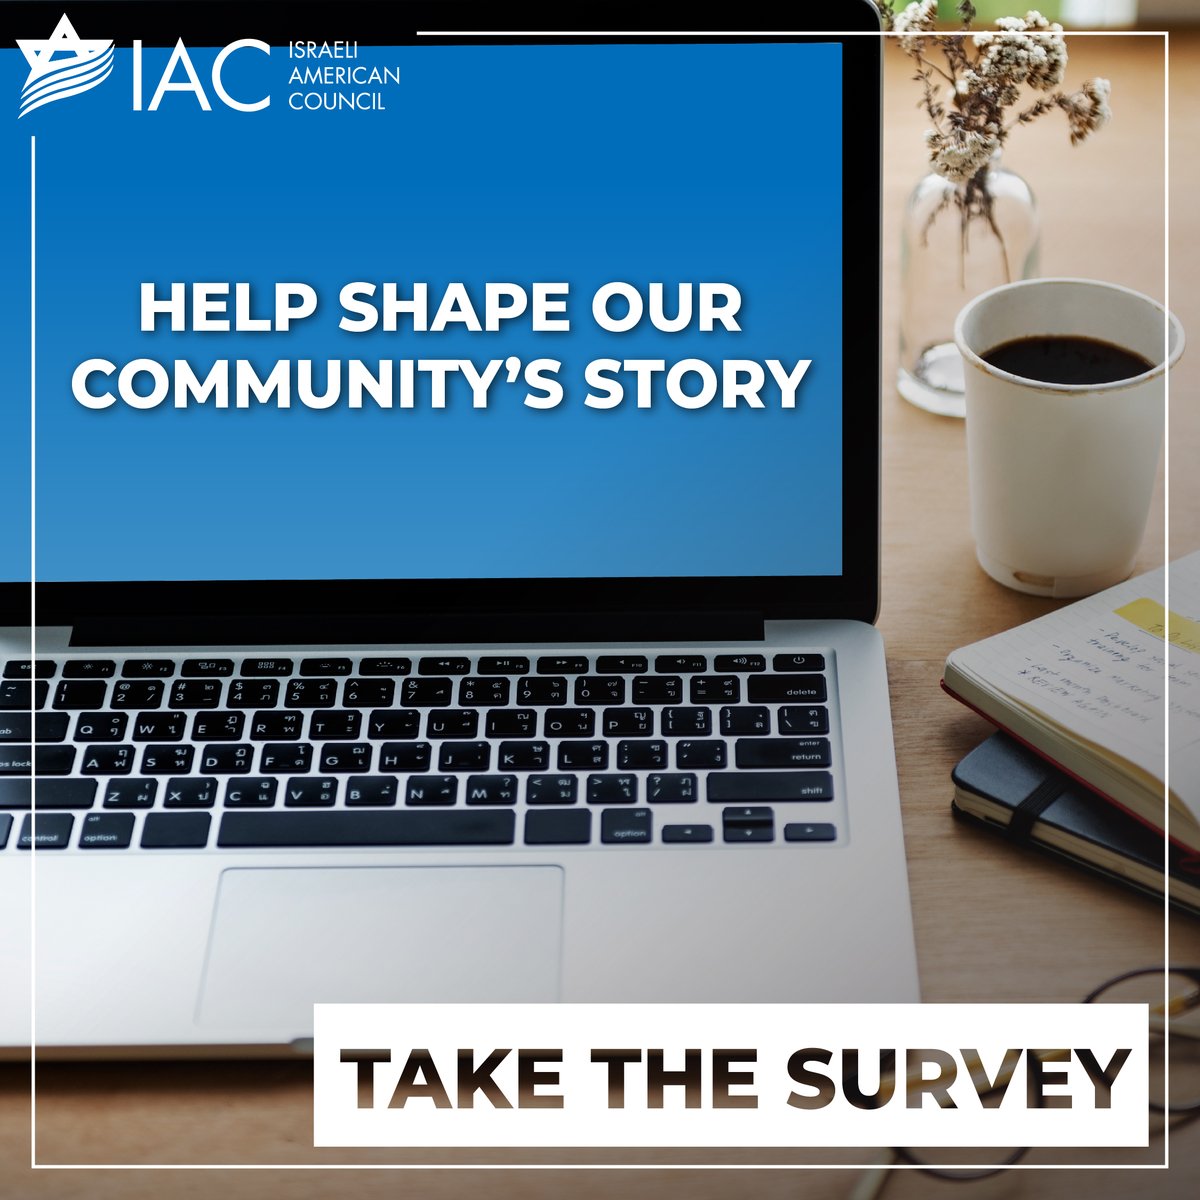 In these challenging times, your input is more crucial than ever. You'll help us understand our community's needs and priorities by taking just a few minutes to complete the survey. Take the survey now: shorturl.at/yBDKX #iacsurvey #jewishlife #community